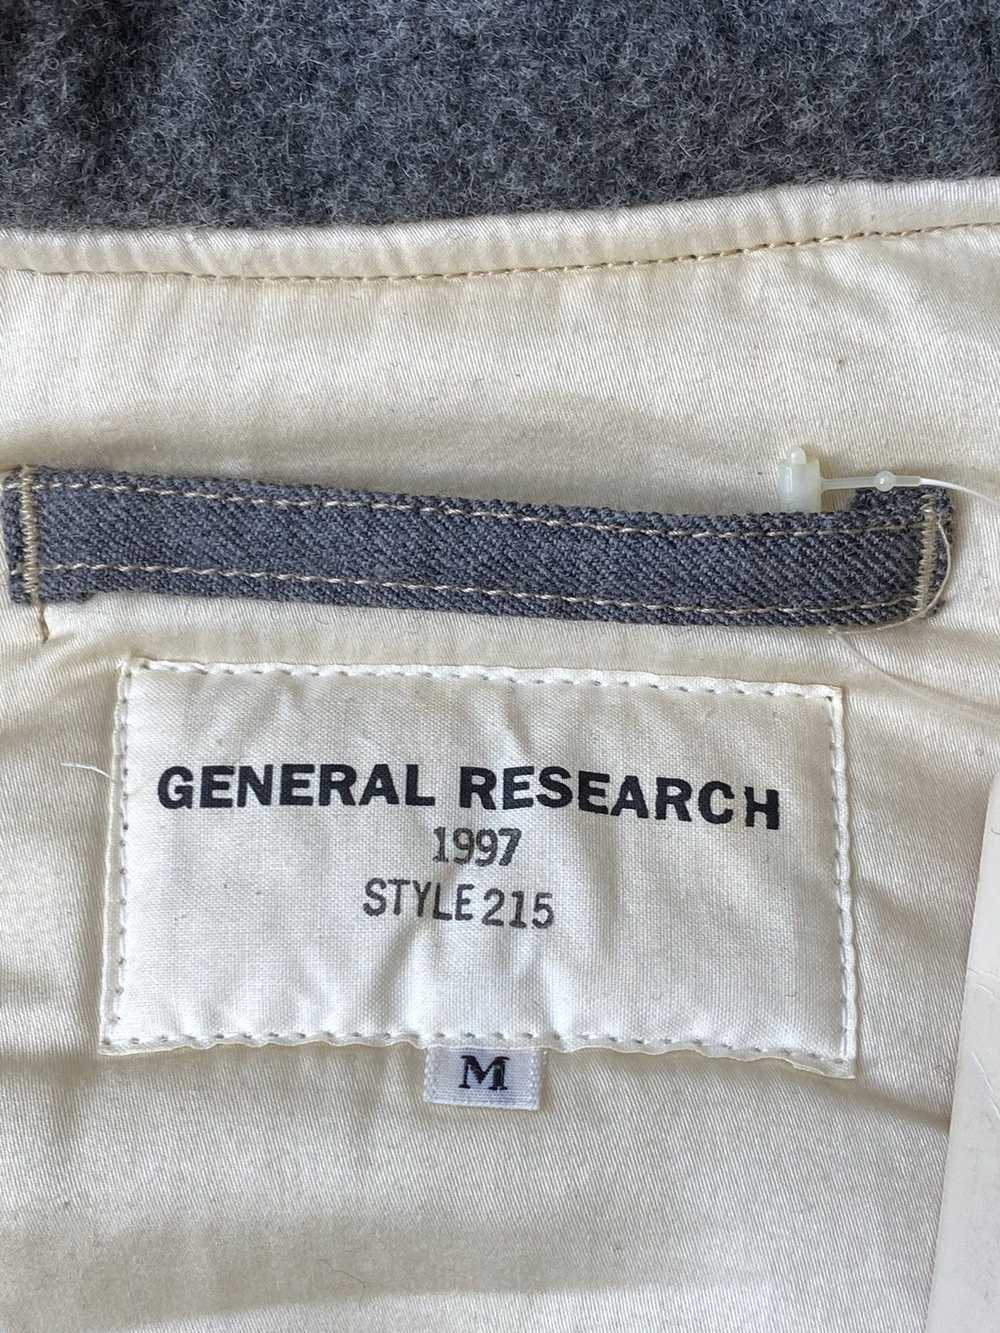 General Research FW/97 General Research Wool Parka - image 8